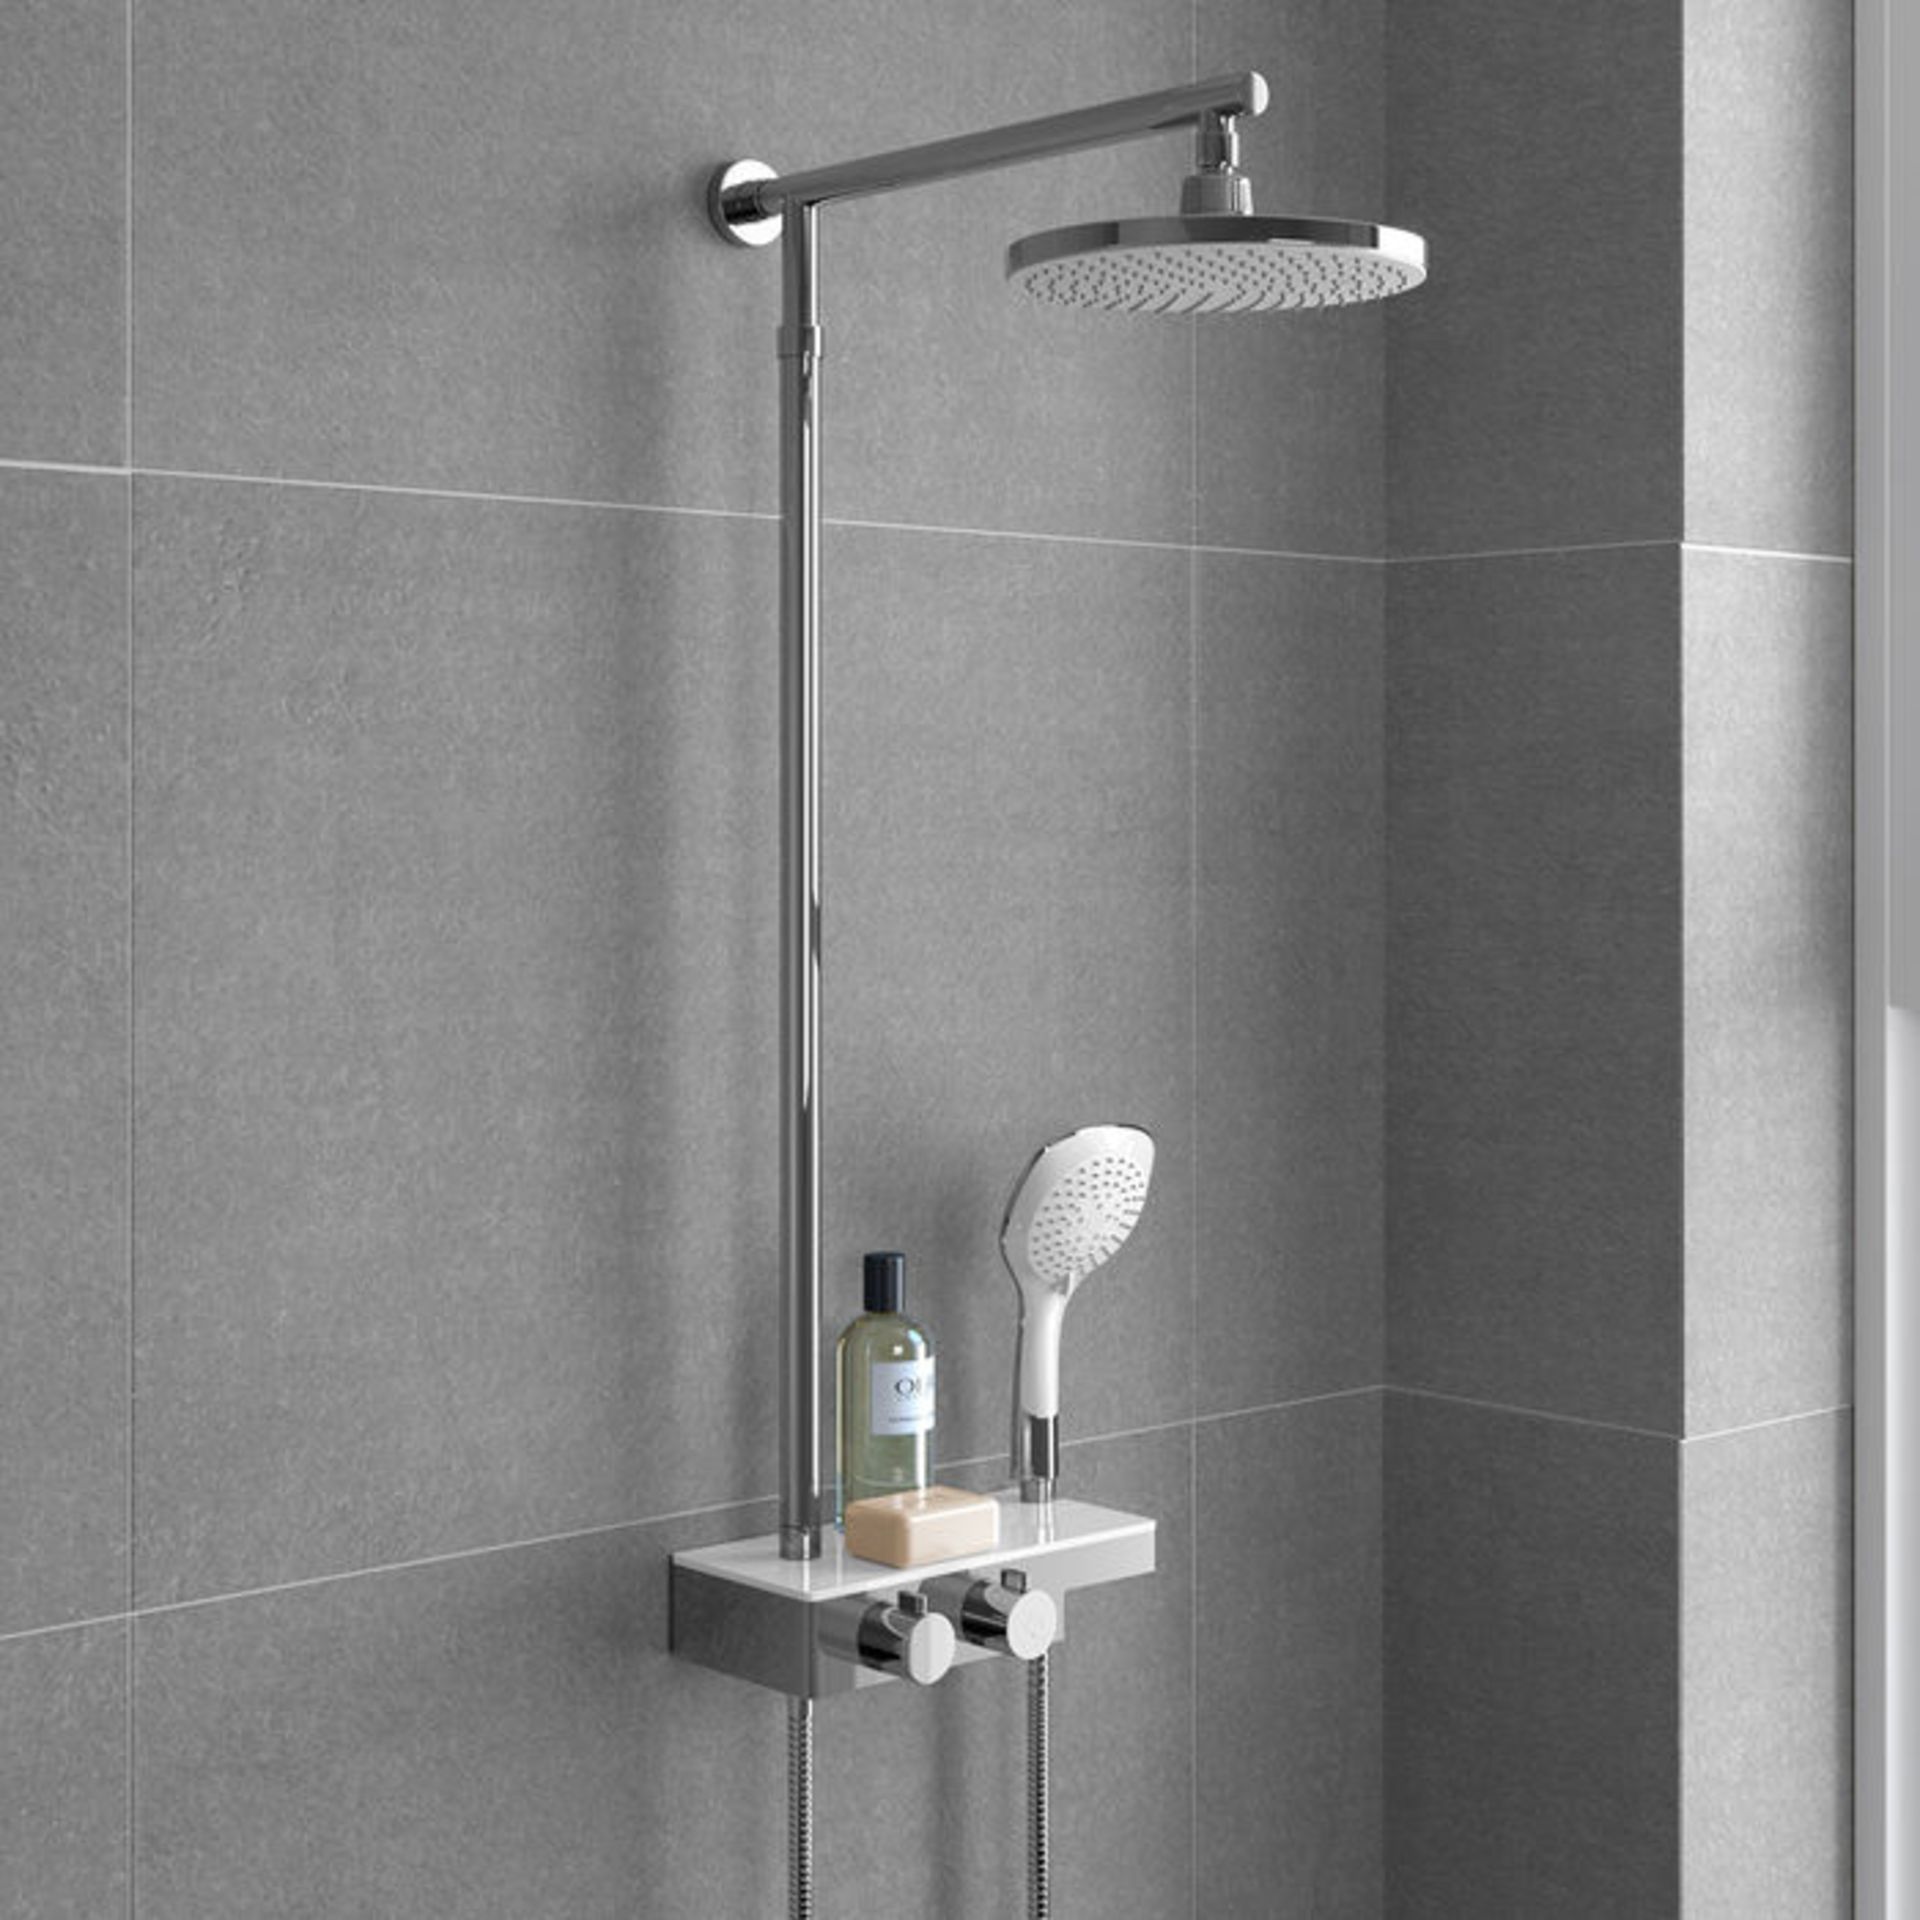 (S42)Round Exposed Thermostatic Mixer Shower Kit Medium Head & Shelf. Cool to touch shower for - Image 2 of 5